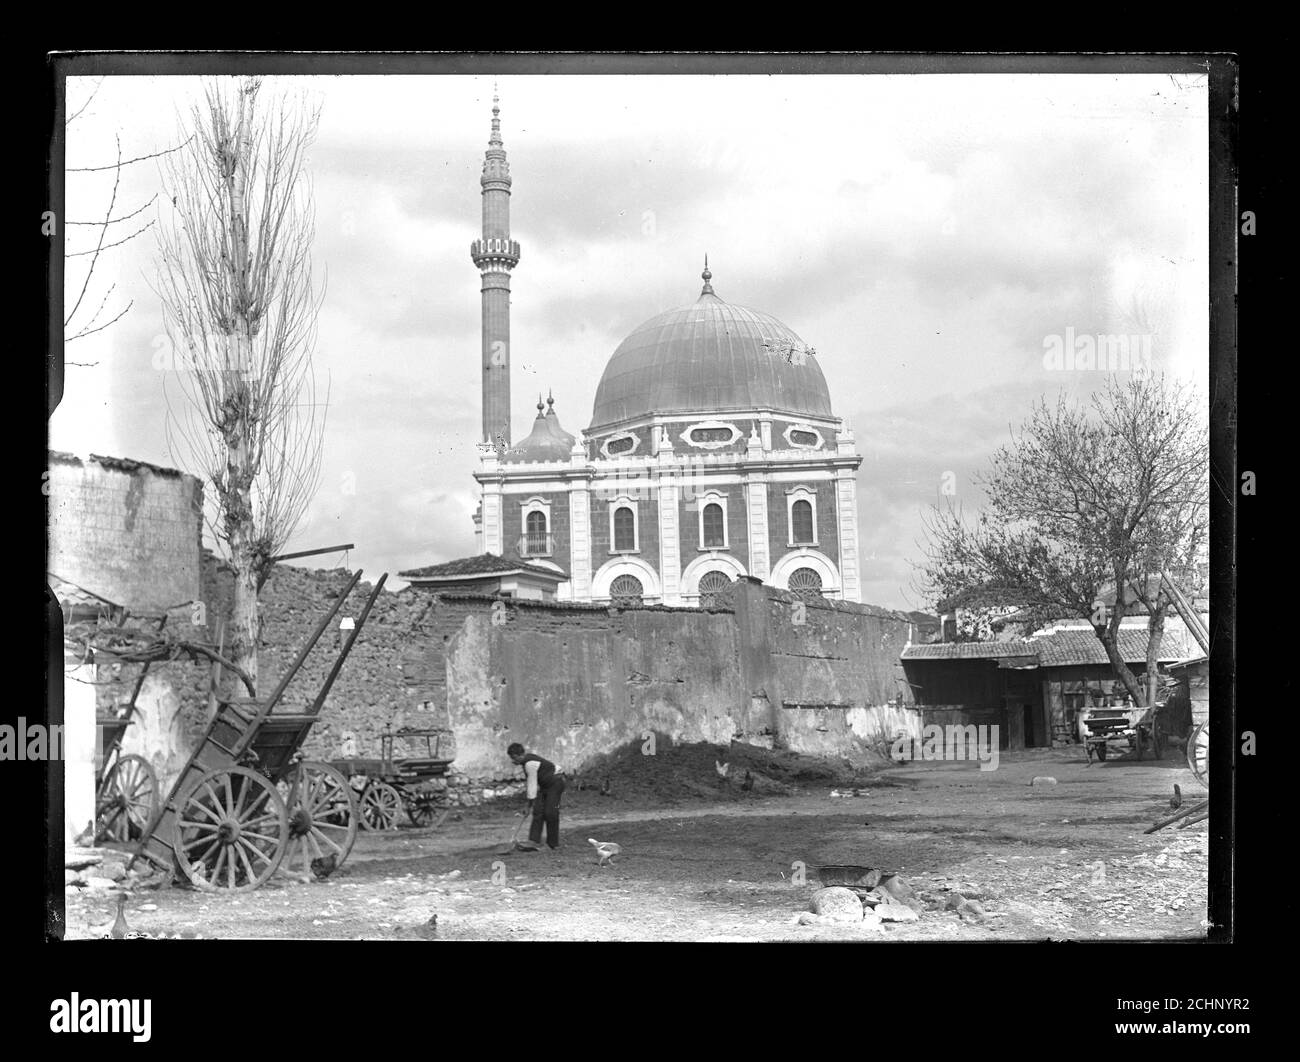 Kemeraltı Salepçioğlu Camii Mosque Turkey Izmir Smyrna around 1910. Salepçioğlu Mosque (Salepçioğlu Camii) is a Mosque in İzmir, Turkey located next to Konak Square in the heart of the city. The mosque which was constructed in the year 1905, is named after its patron Salepçizade Hacı Ahmet Efendi. The photograph shows the minaret in its original form; it has been destroyed during an earthquake in 1927. Photograph on dry glass plate from the Herry W. Schaefer collection. Stock Photo